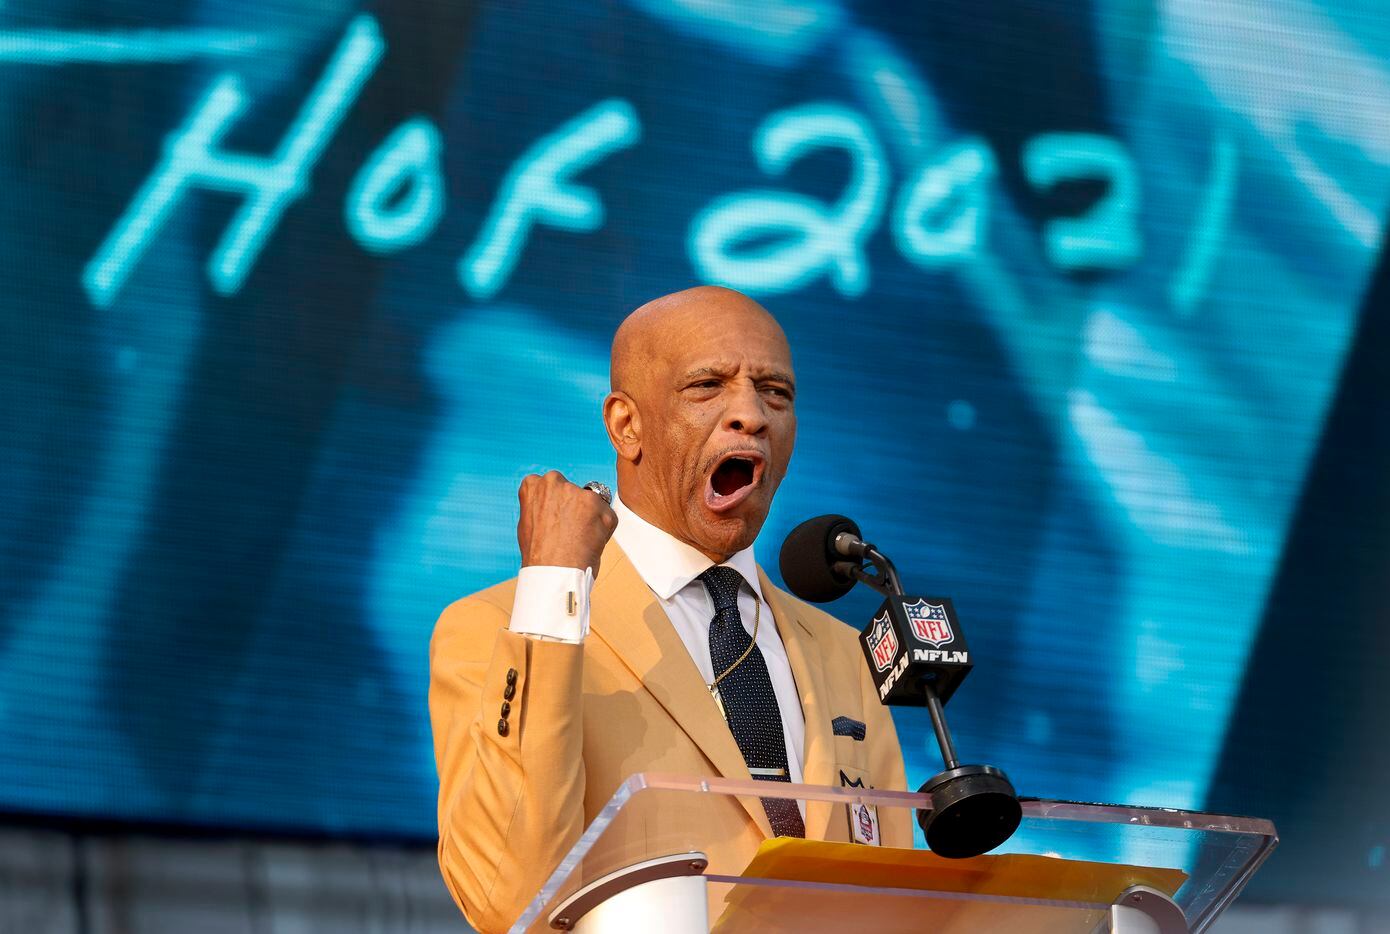 Pro Football Hall of Fame inductee Drew Pearson of the Dallas Cowboys delivers an impassioned speech during the Class of 2021 enshrinement ceremony at Tom Benson Hall of Fame Stadium in Canton, Ohio, Sunday, August 8, 2021. (Tom Fox/The Dallas Morning News)